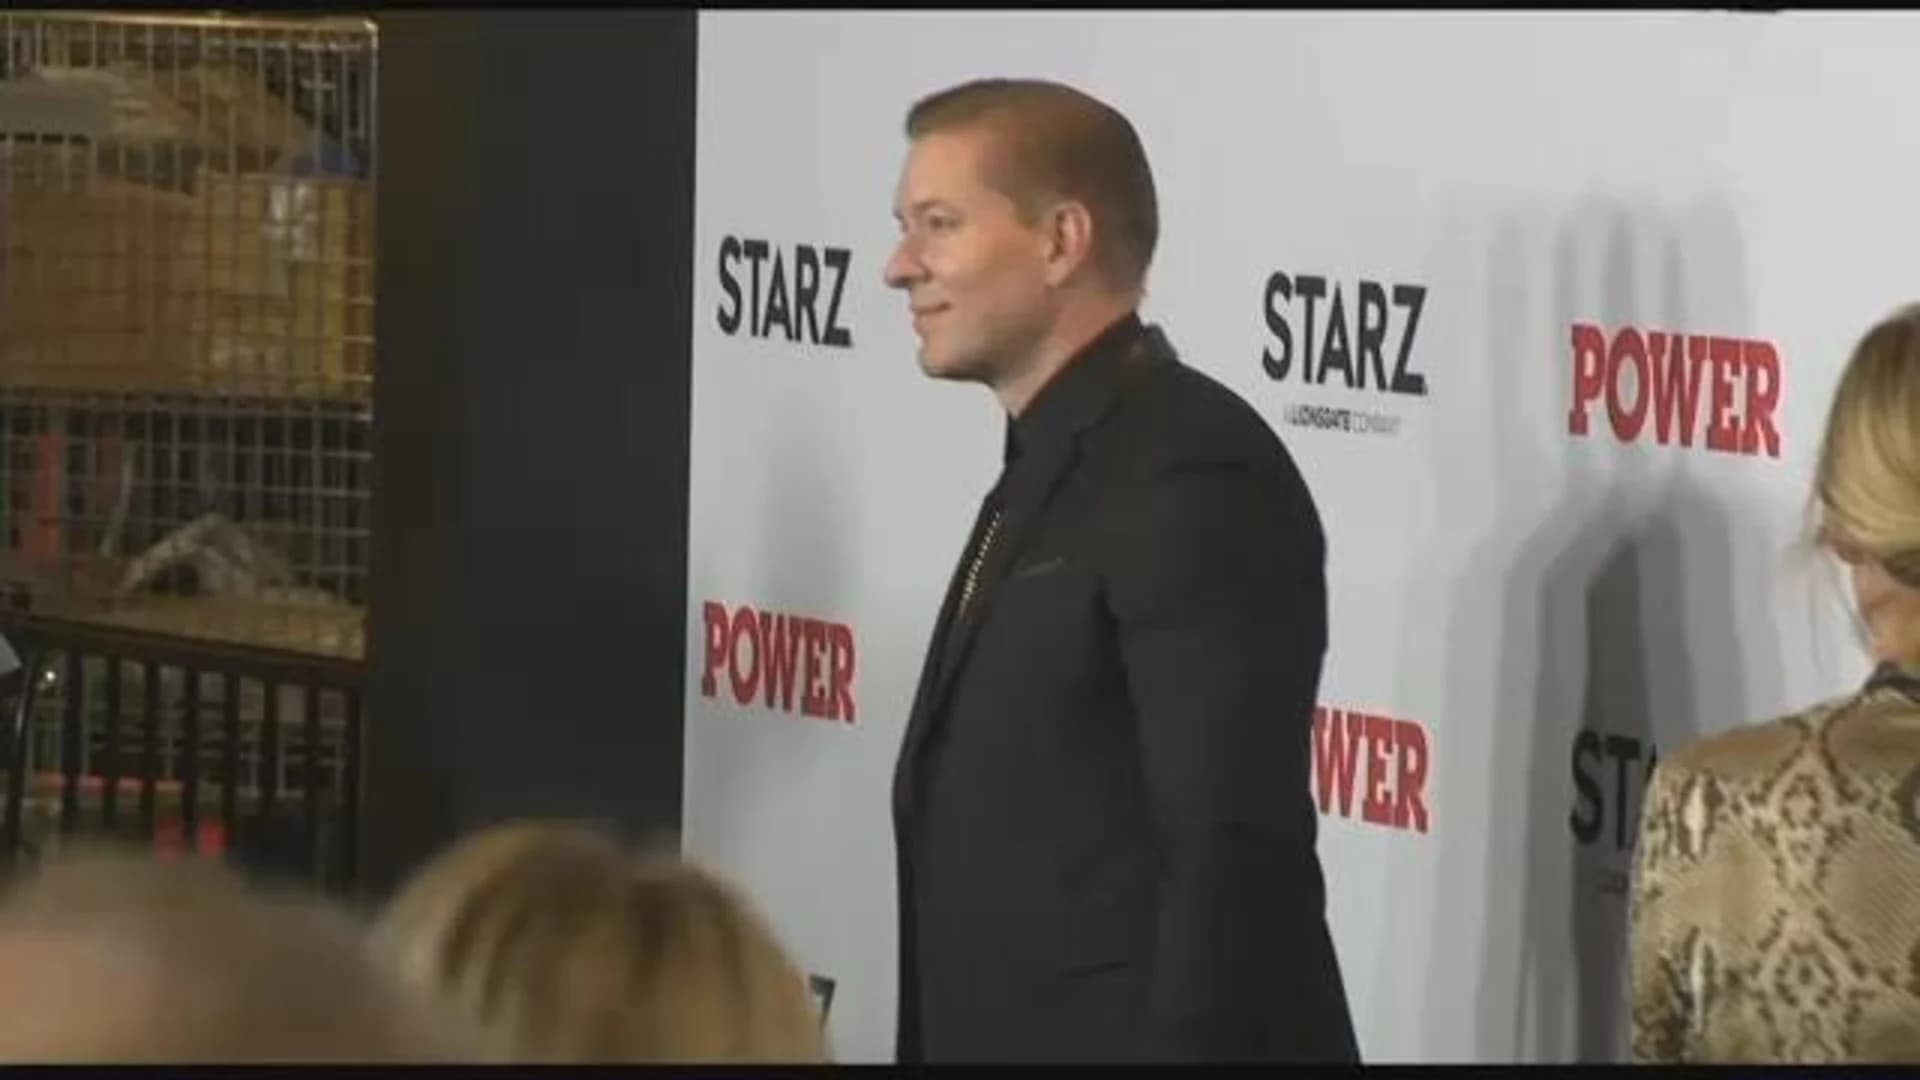 'I went a little bit nuts:' Joseph Sikora dishes on 'Power' party at MSG and more